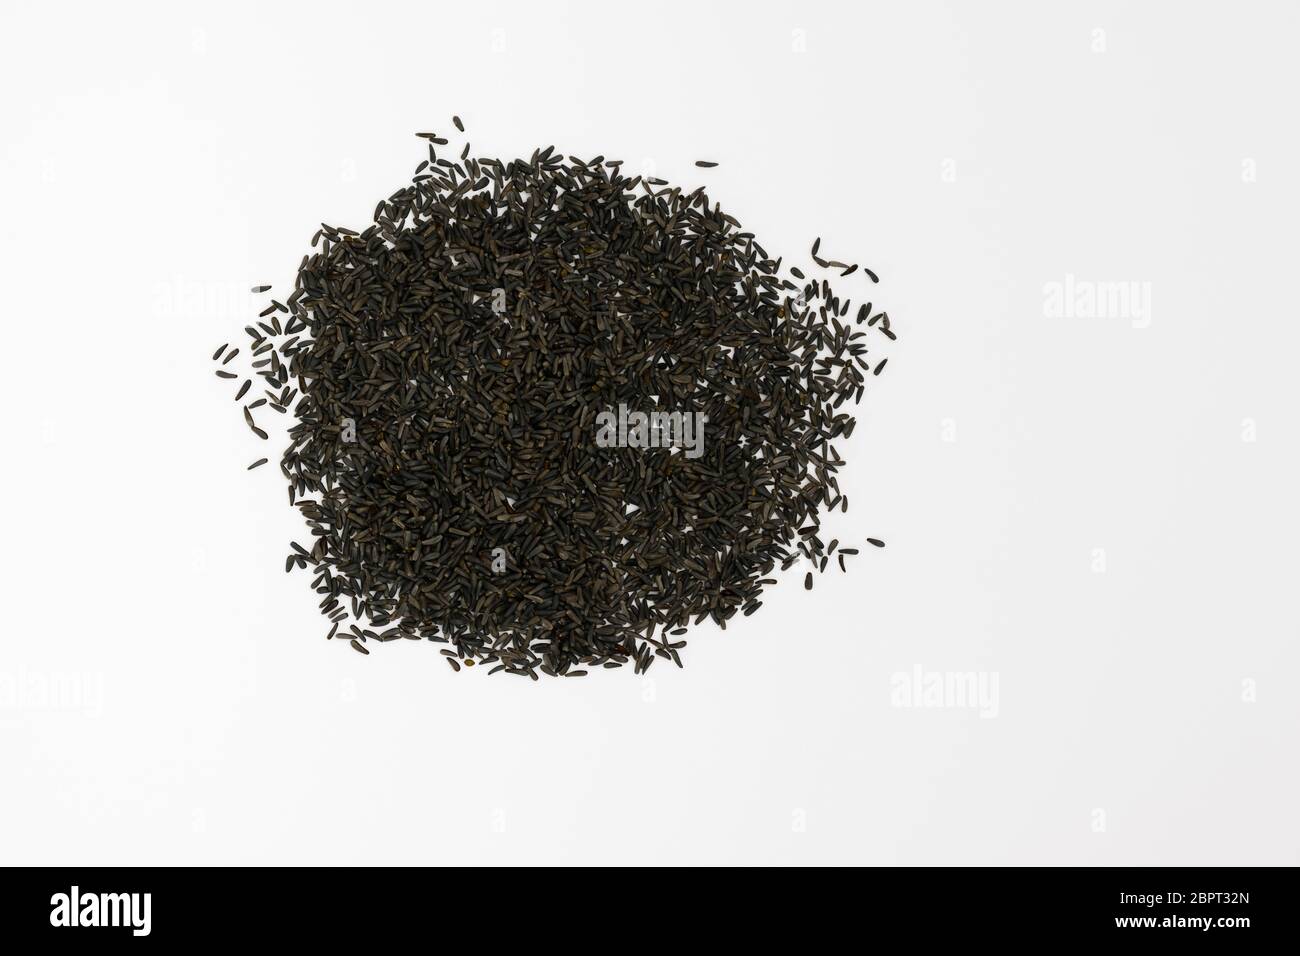 Blackseeds or Niger seeds (Guizotia abyssinica) on a white background Stock Photo